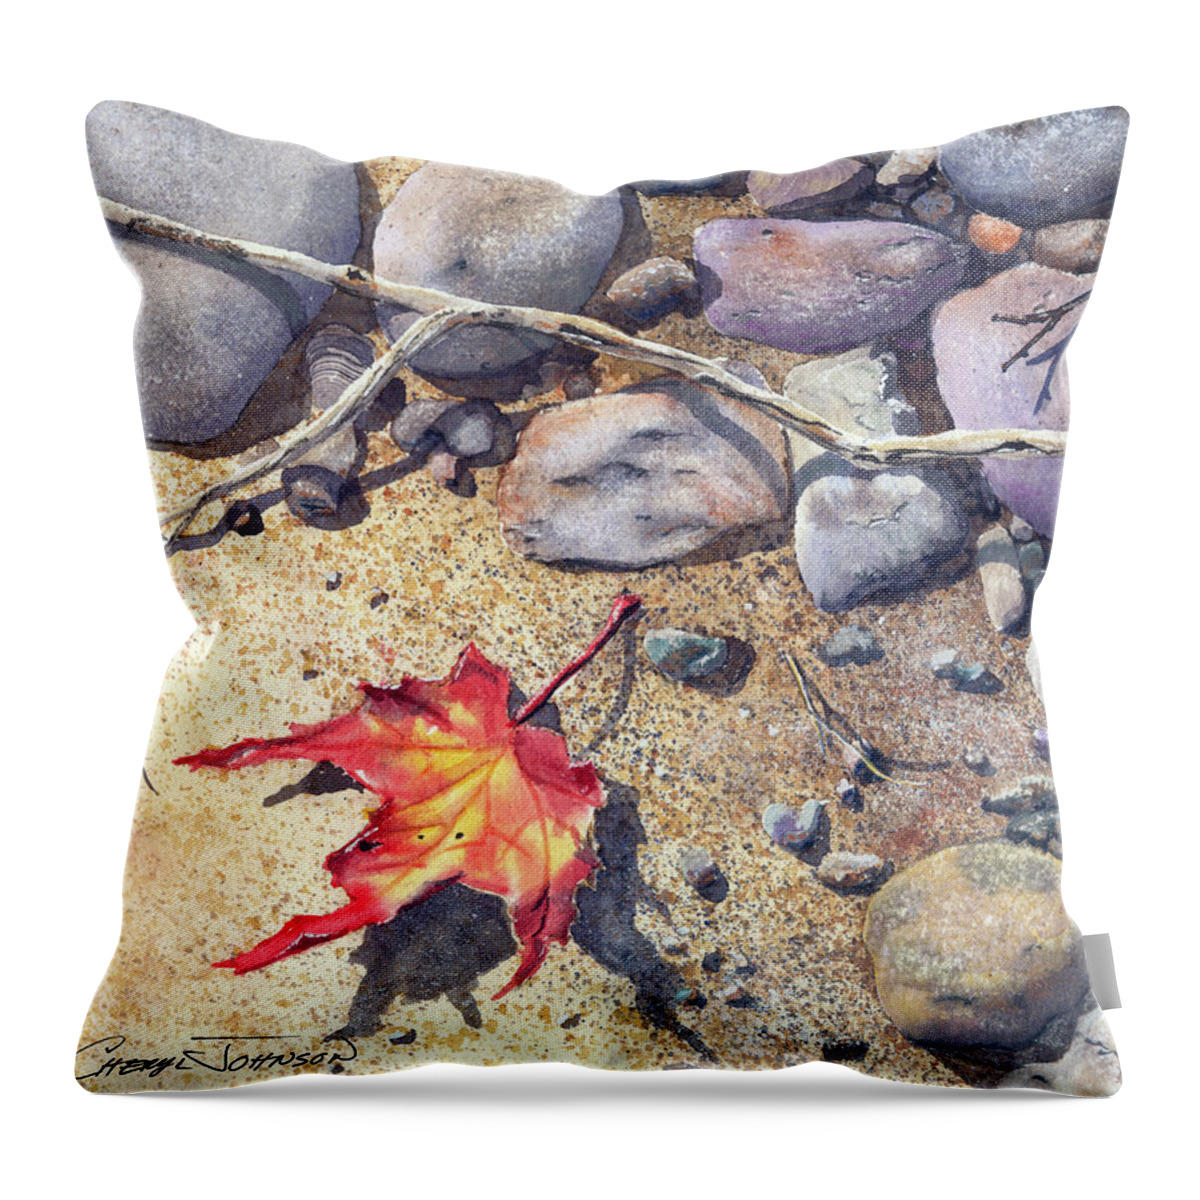 Maple Leaf Throw Pillow featuring the painting Sticks and Stones by Cheryl Johnson